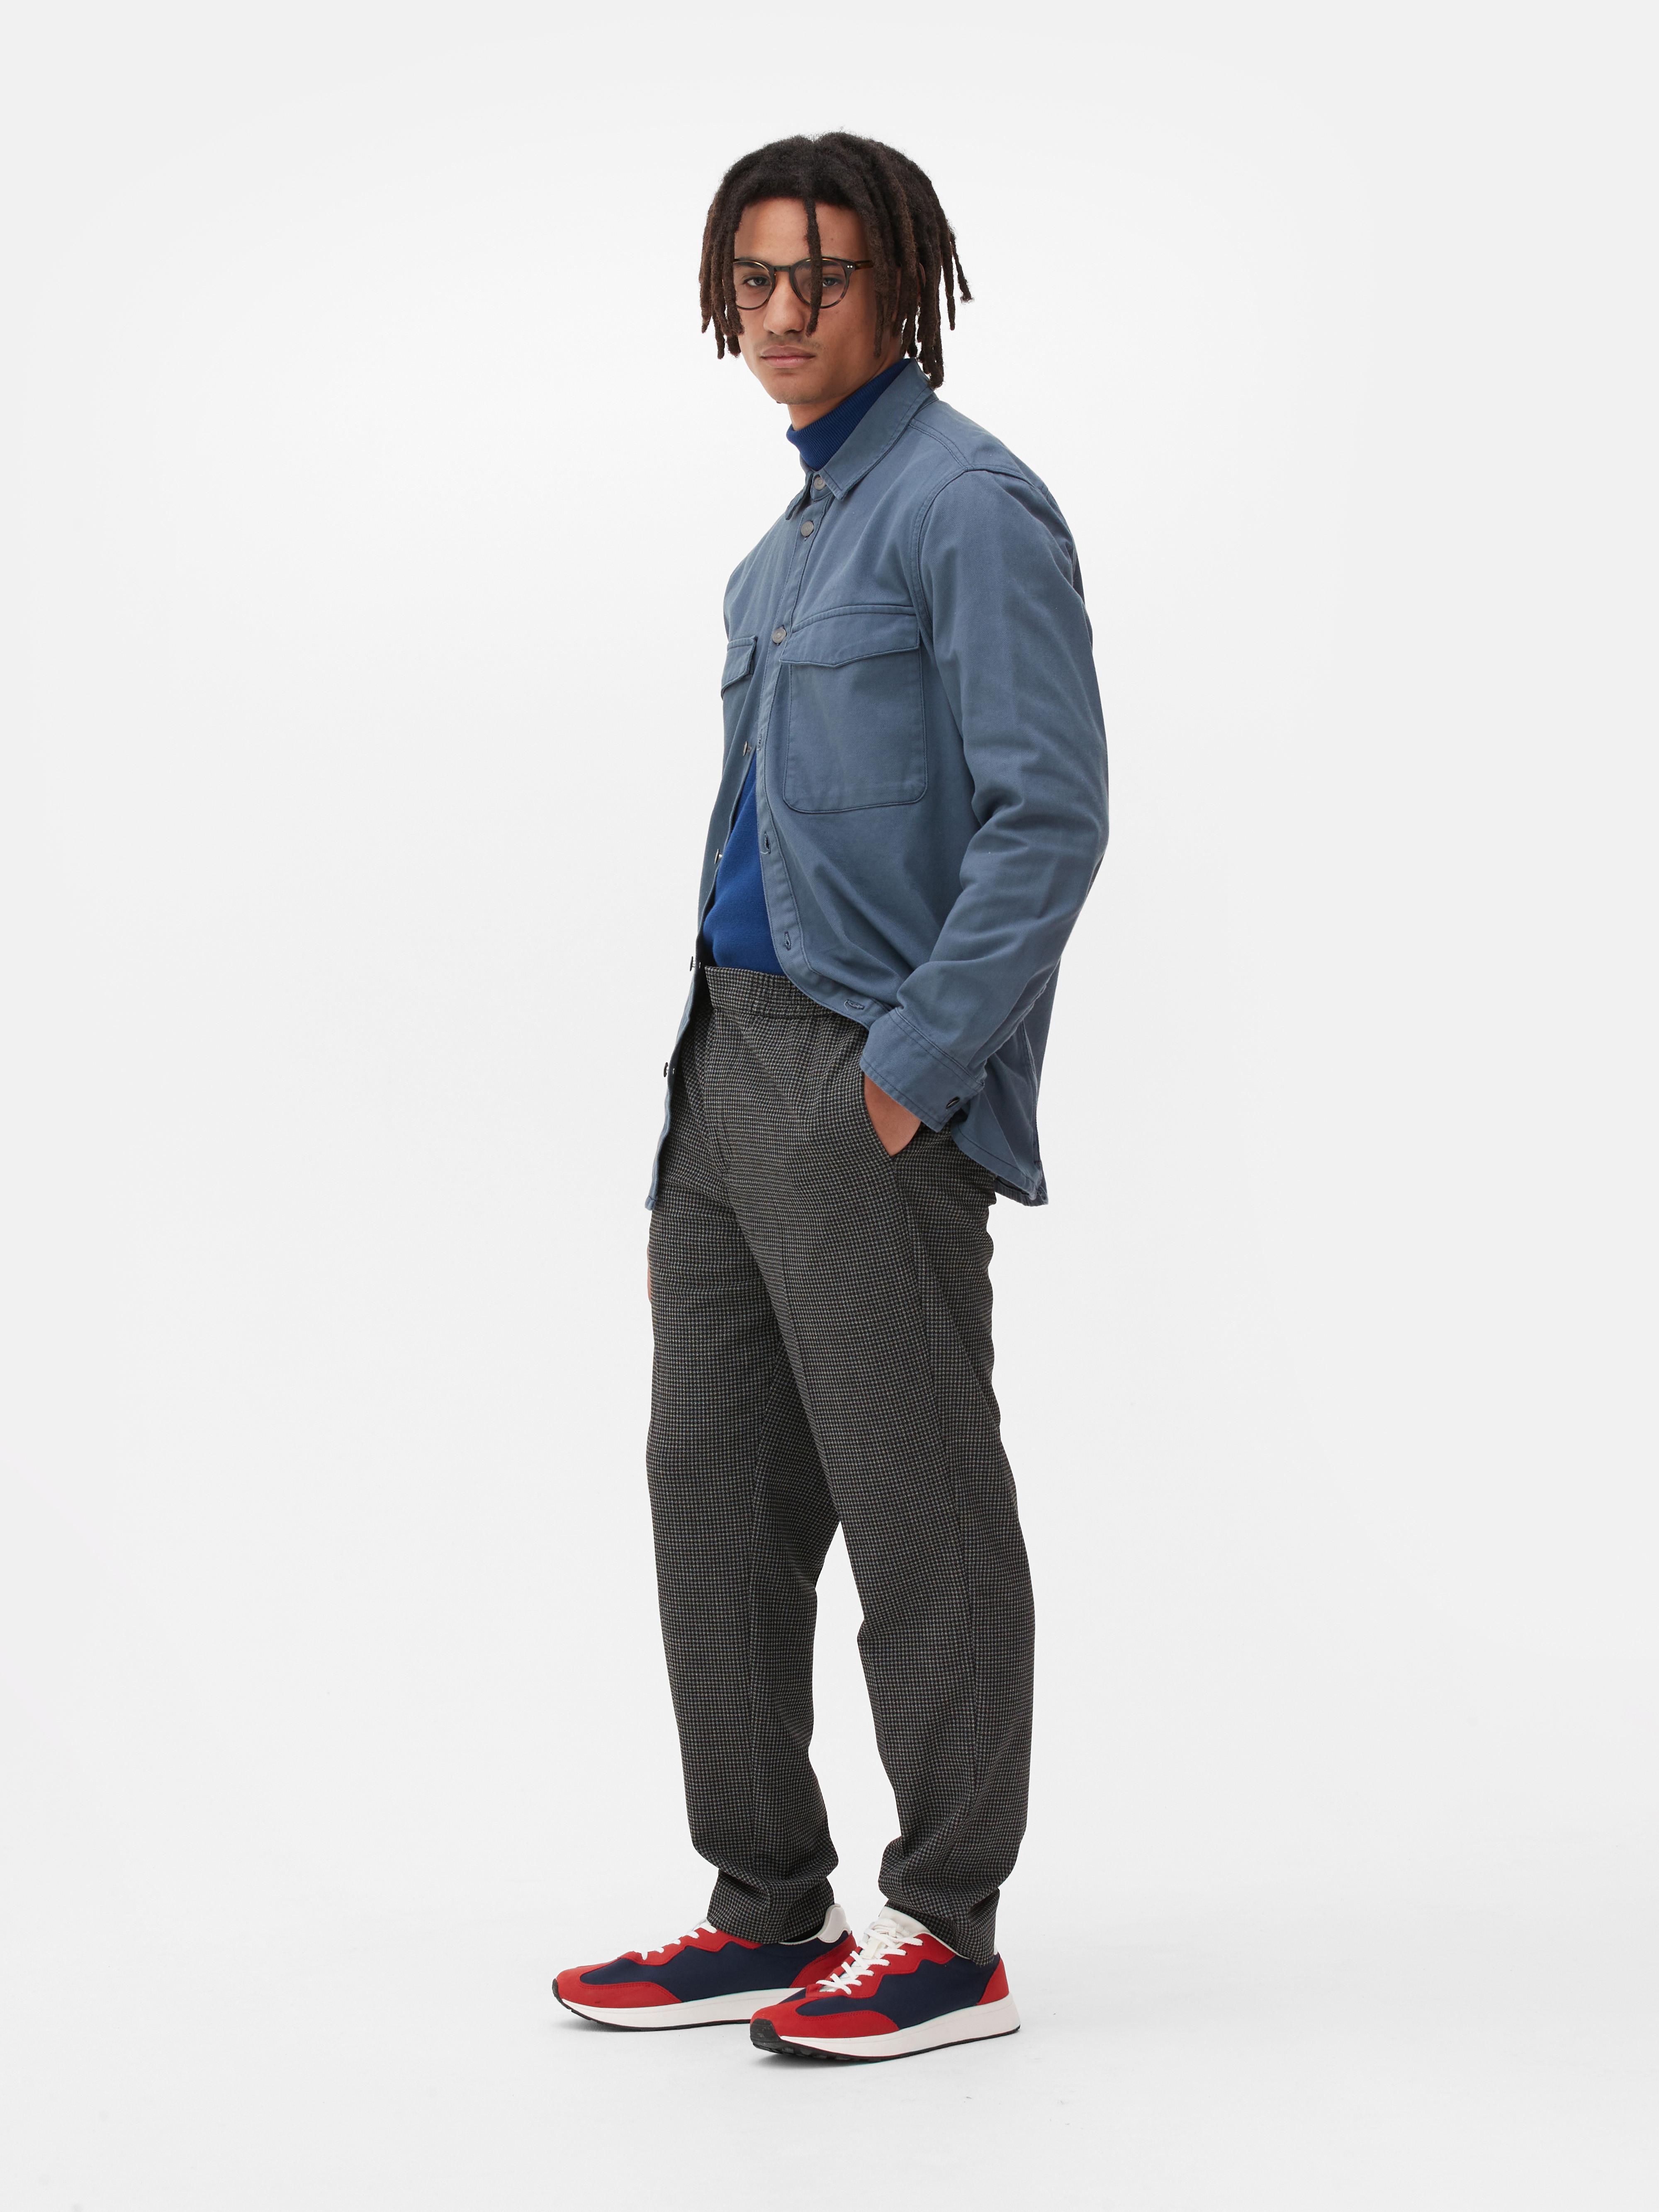 Tailored Puppytooth Trousers